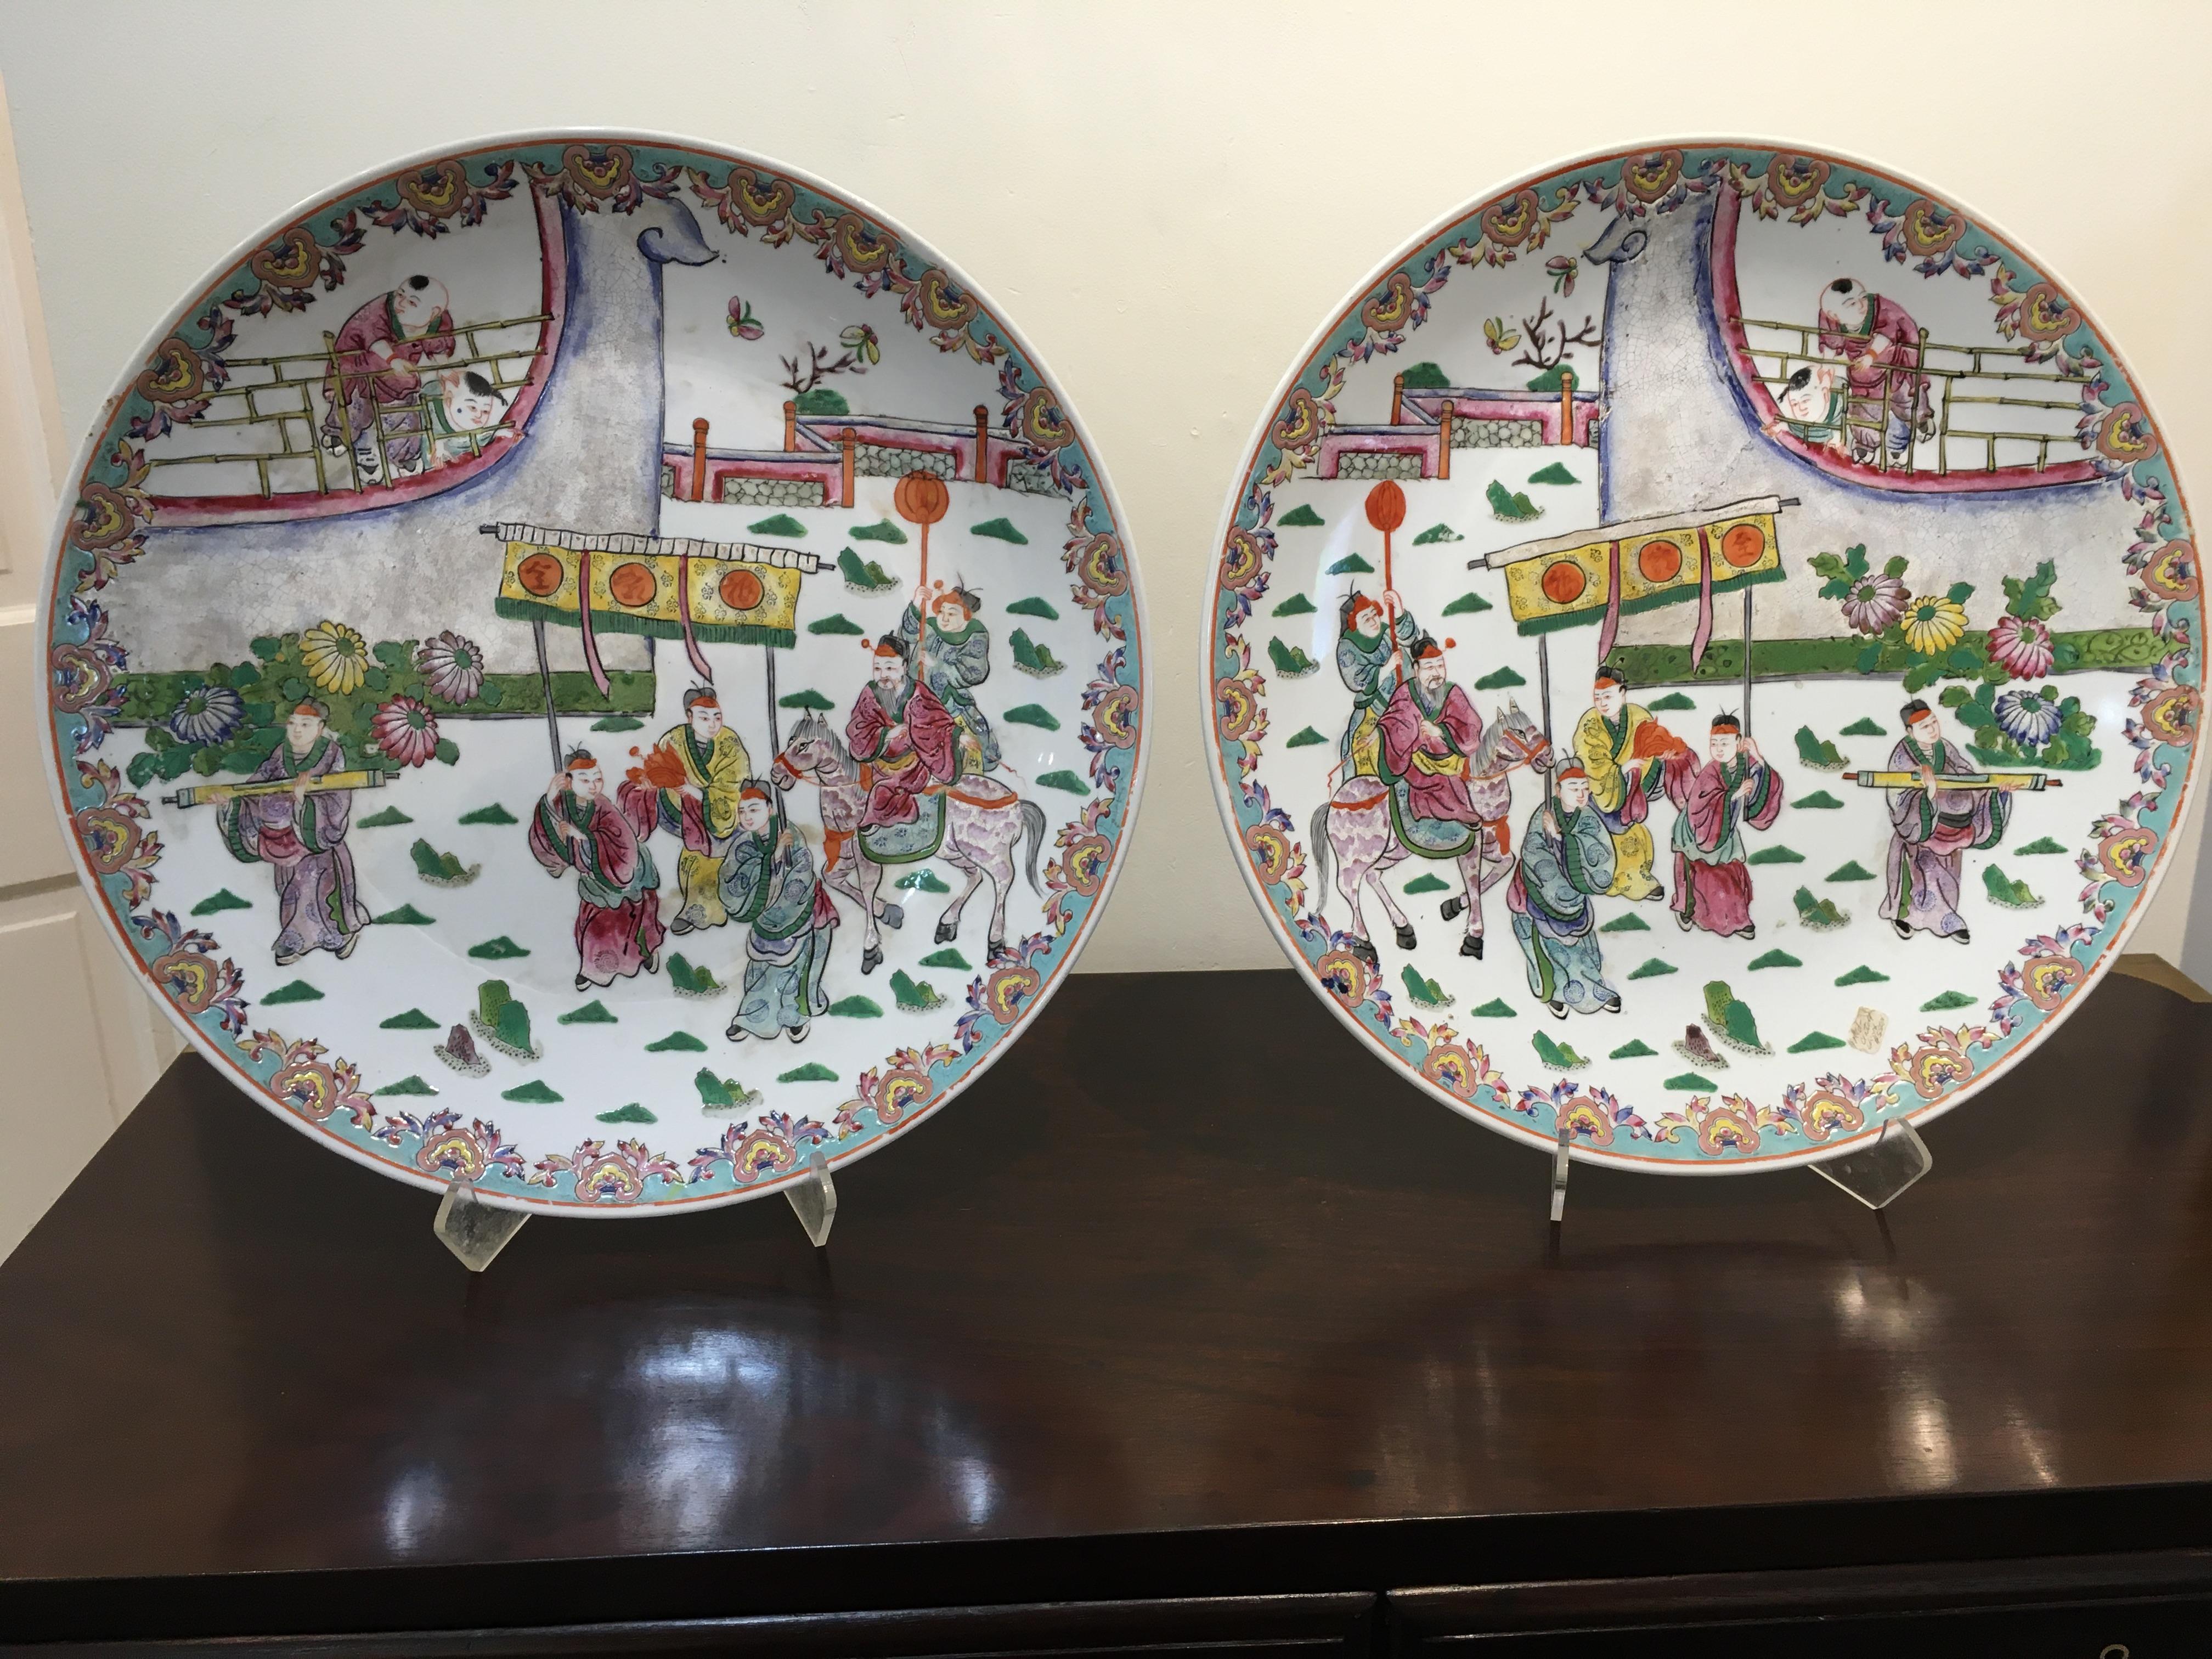 Very rare to find a true pair of Famille rose porcelain chargers. Look closely, there is a left hand view and right hand view. Scene depicts an important arrival complete with entourage and onlookers. Butterflies on the underside with markings. In